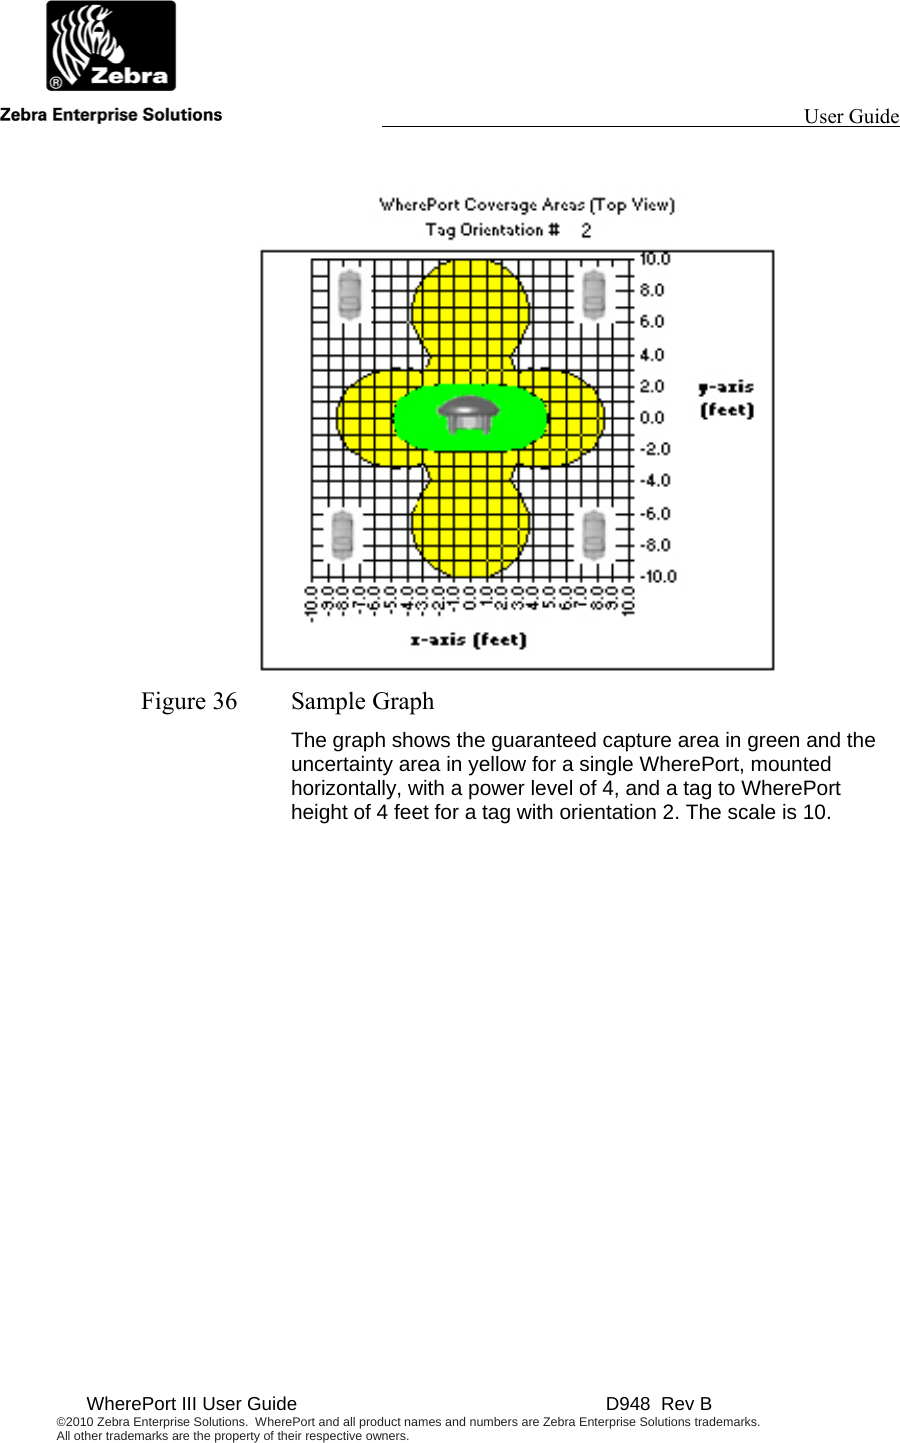                                                                                                                 User Guide                                        WherePort III User Guide    D948  Rev B ©2010 Zebra Enterprise Solutions.  WherePort and all product names and numbers are Zebra Enterprise Solutions trademarks.  All other trademarks are the property of their respective owners.     Figure 36  Sample Graph The graph shows the guaranteed capture area in green and the uncertainty area in yellow for a single WherePort, mounted horizontally, with a power level of 4, and a tag to WherePort height of 4 feet for a tag with orientation 2. The scale is 10.  